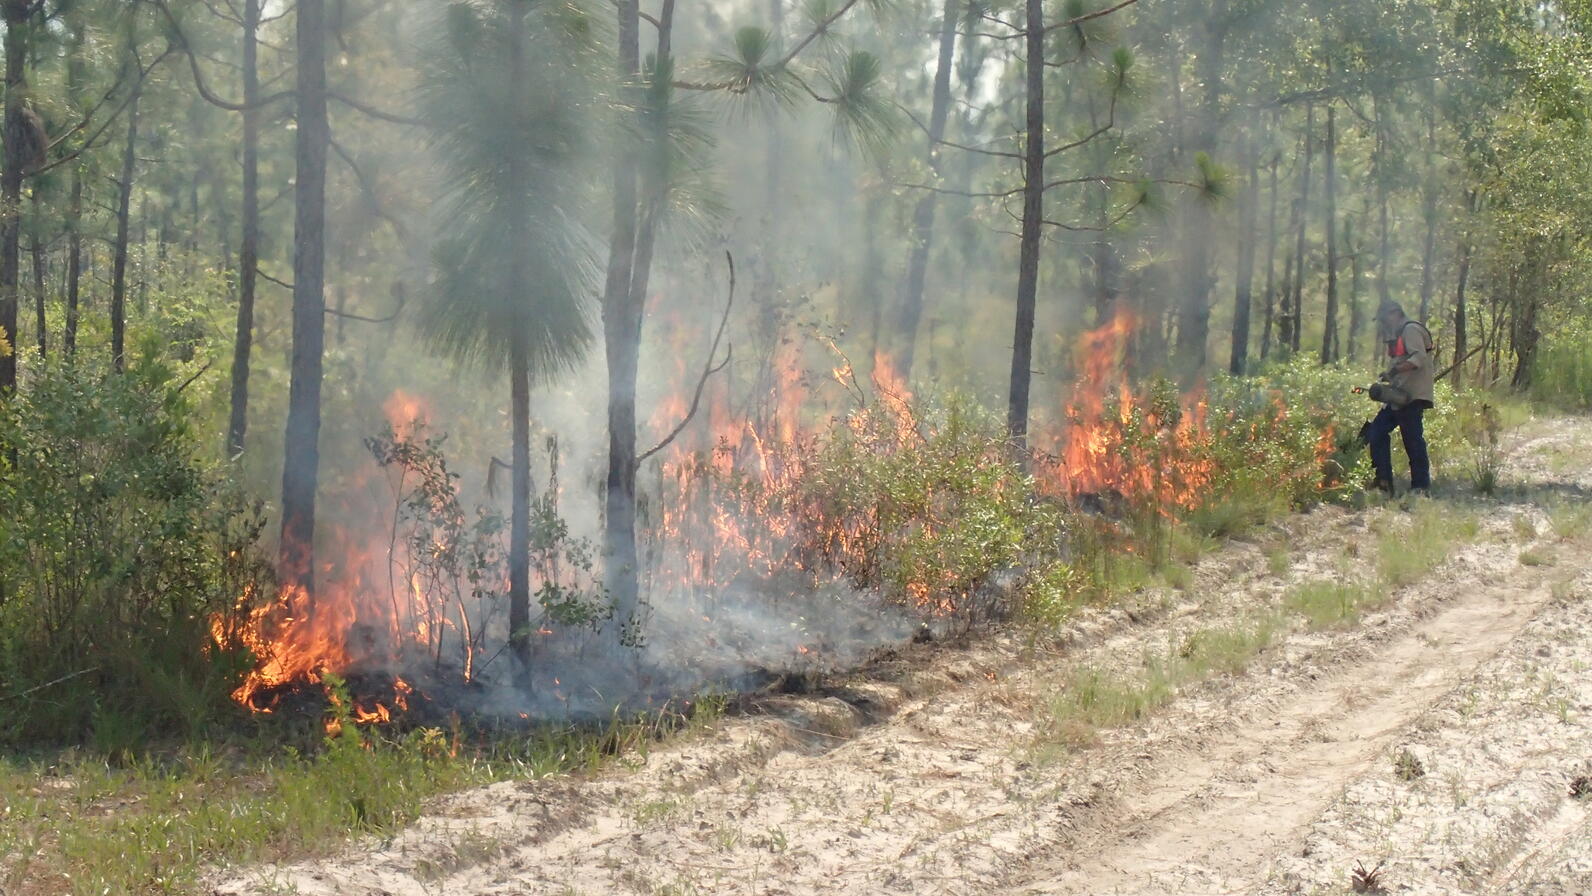 A man down the side of a fireline (basically a dirt moat to prevent fire from passing over) is using a drip torch to pour liquid flame down onto the edge of a forest plot to help create a prescribed burn to help reduce competition for the Longleaf Pine.